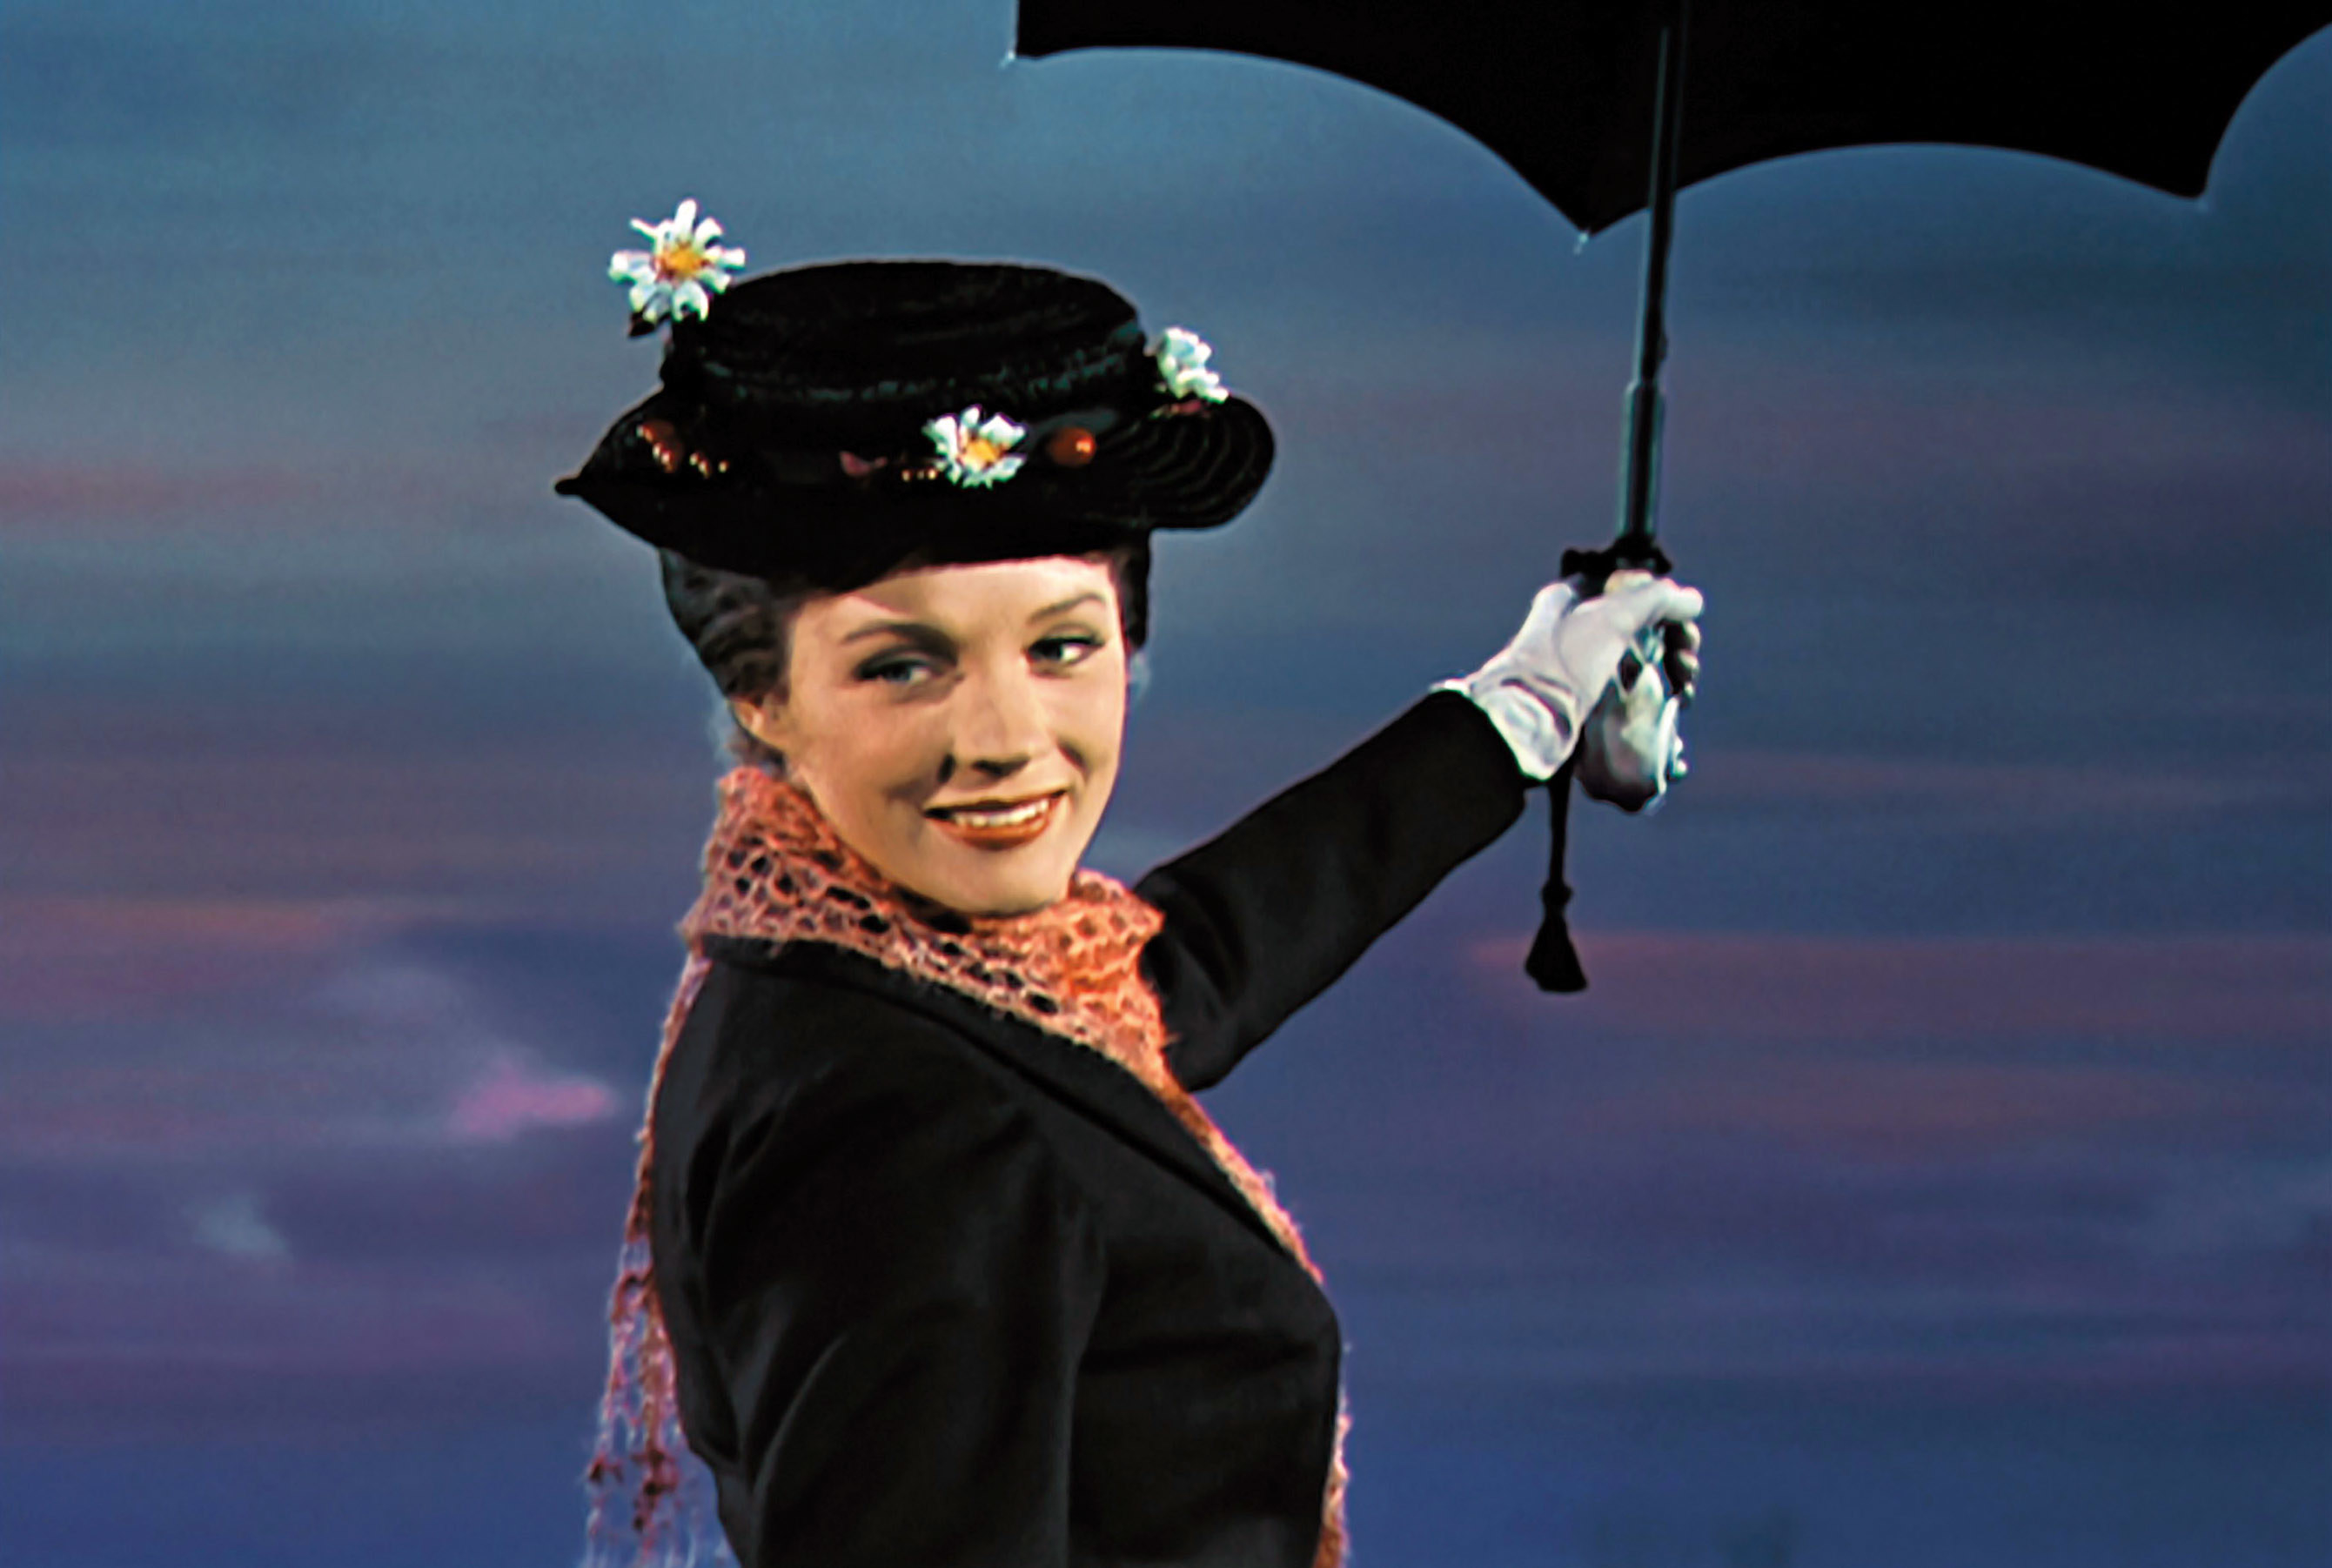 Mary Poppins flying away